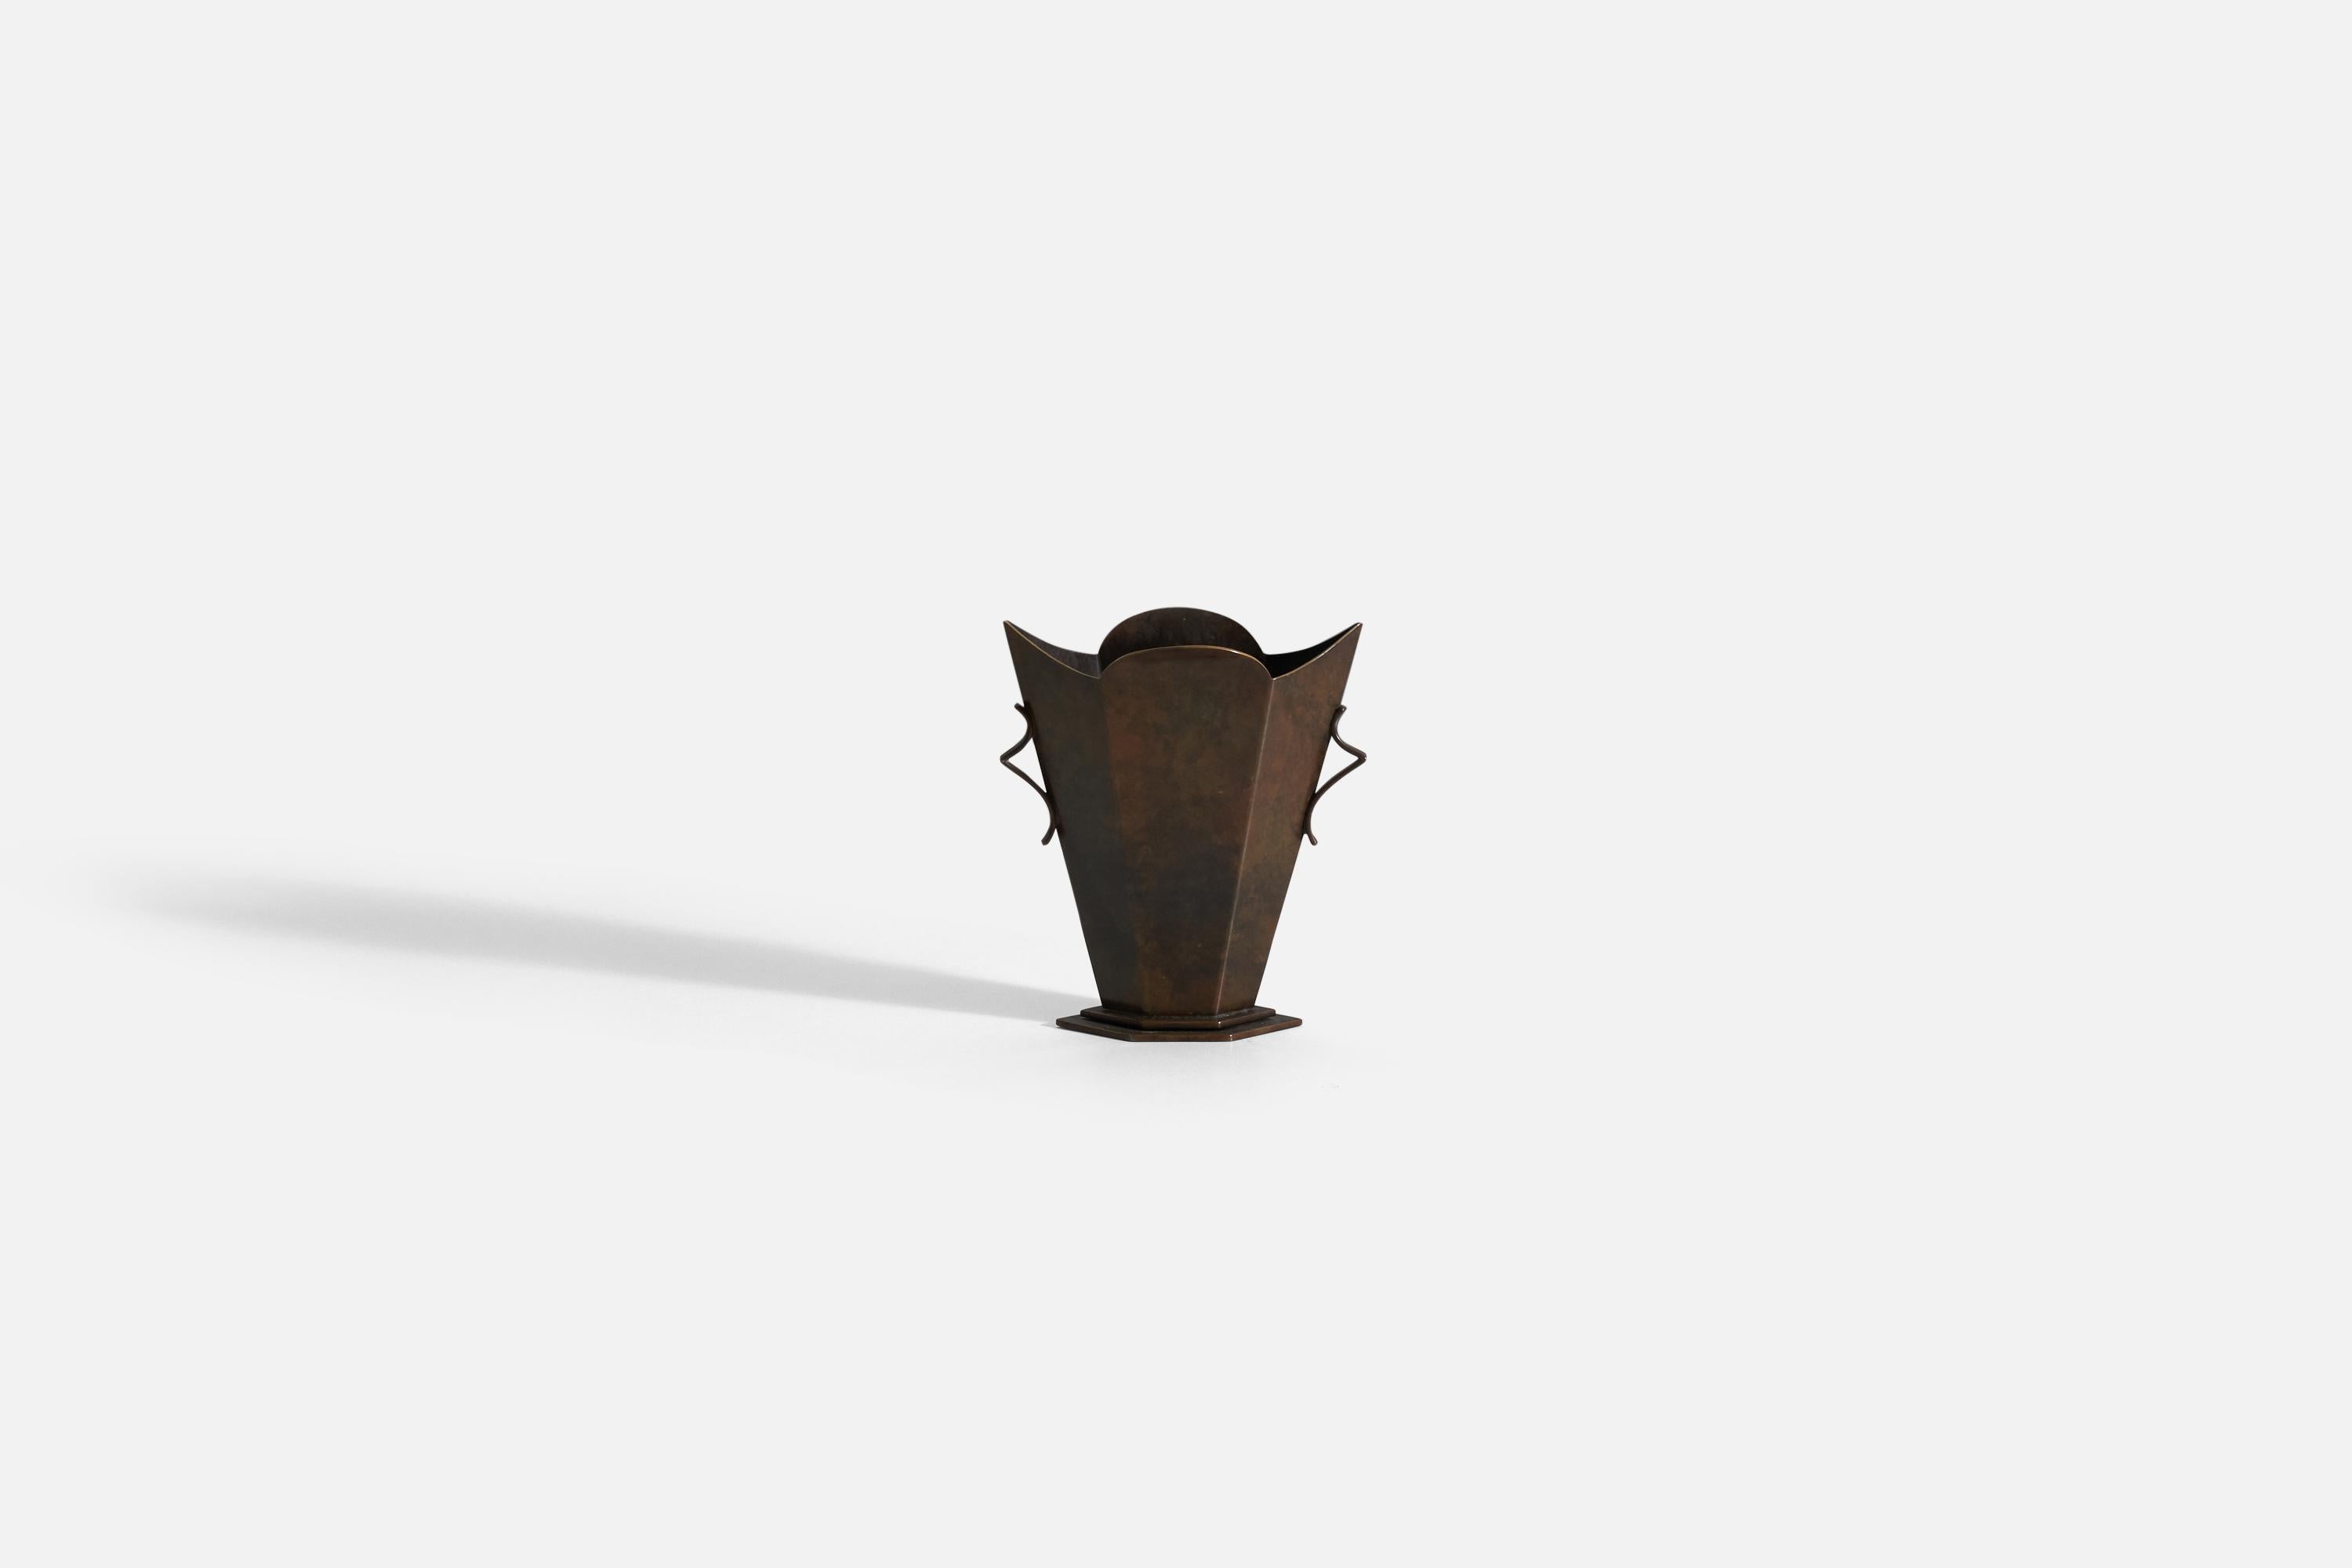 A cast bronze vase designed and produced in Denmark, c. 1930s.